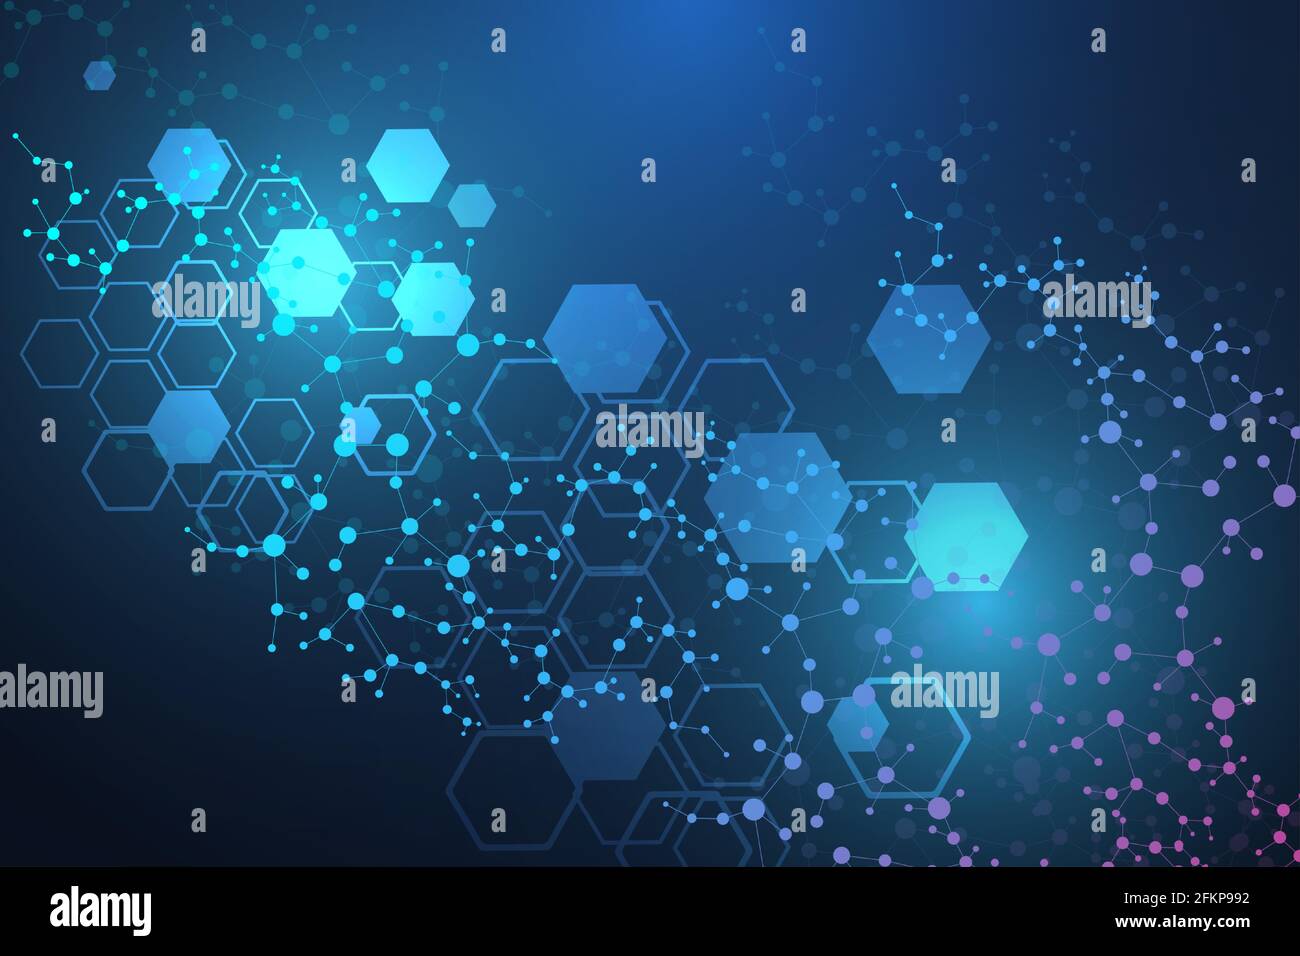 Modern futuristic background of the scientific hexagonal pattern. Virtual abstract background with particle, molecule structure for medical Stock Vector